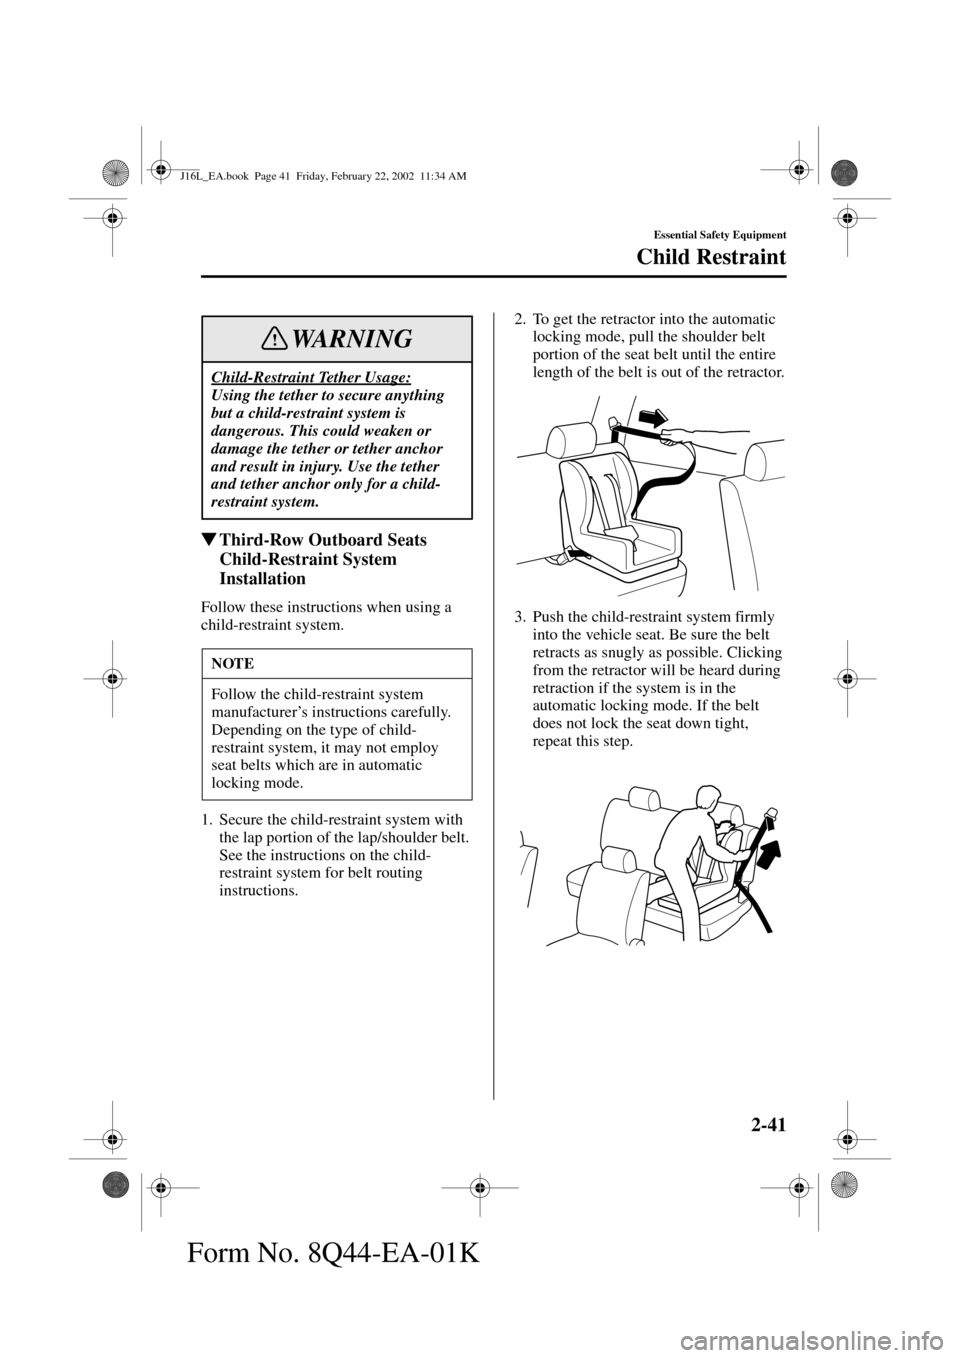 MAZDA MODEL MPV 2002  Owners Manual (in English) 2-41
Essential Safety Equipment
Child Restraint
Form No. 8Q44-EA-01K
Third-Row Outboard Seats 
Child-Restraint System 
Installation
Follow these instructions when using a 
child-restraint system.
1. 